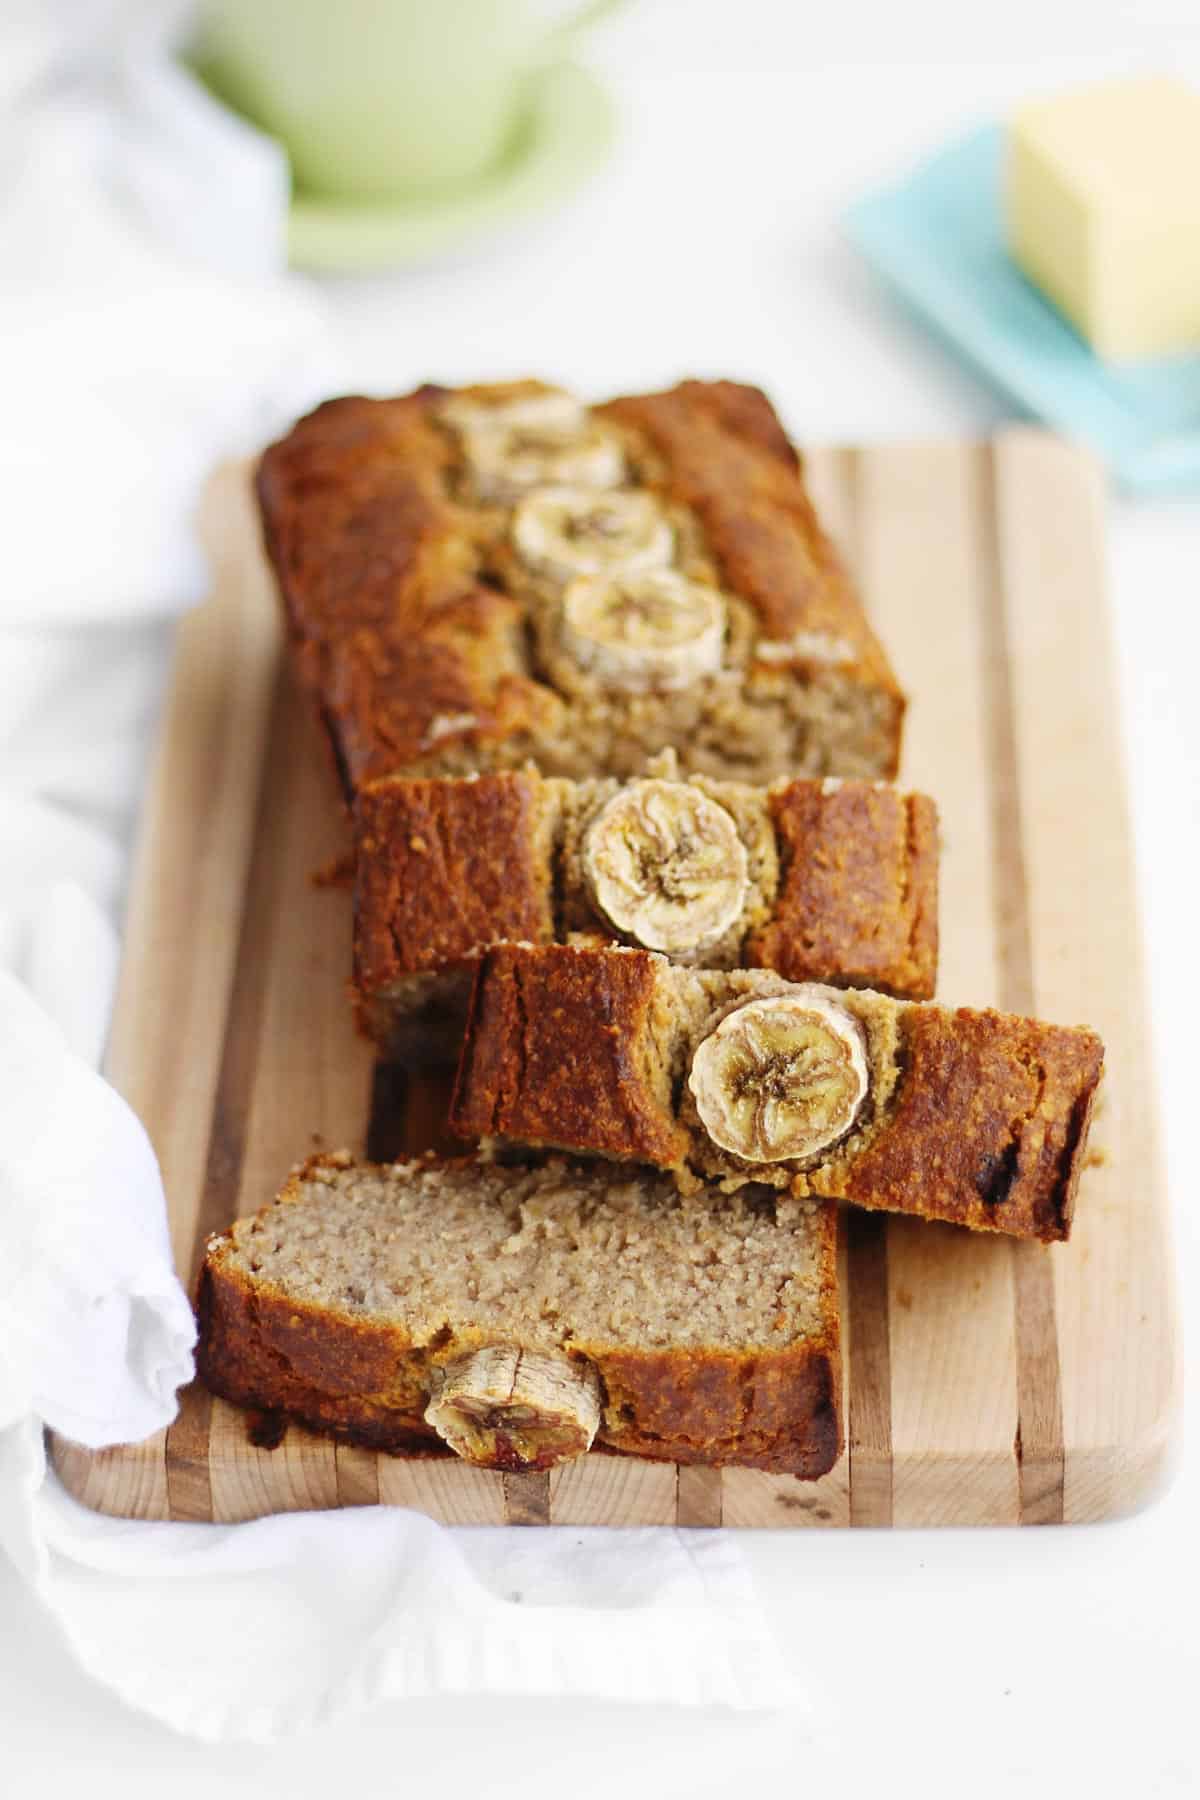 A photo of slices of banana bread on a cutting board.